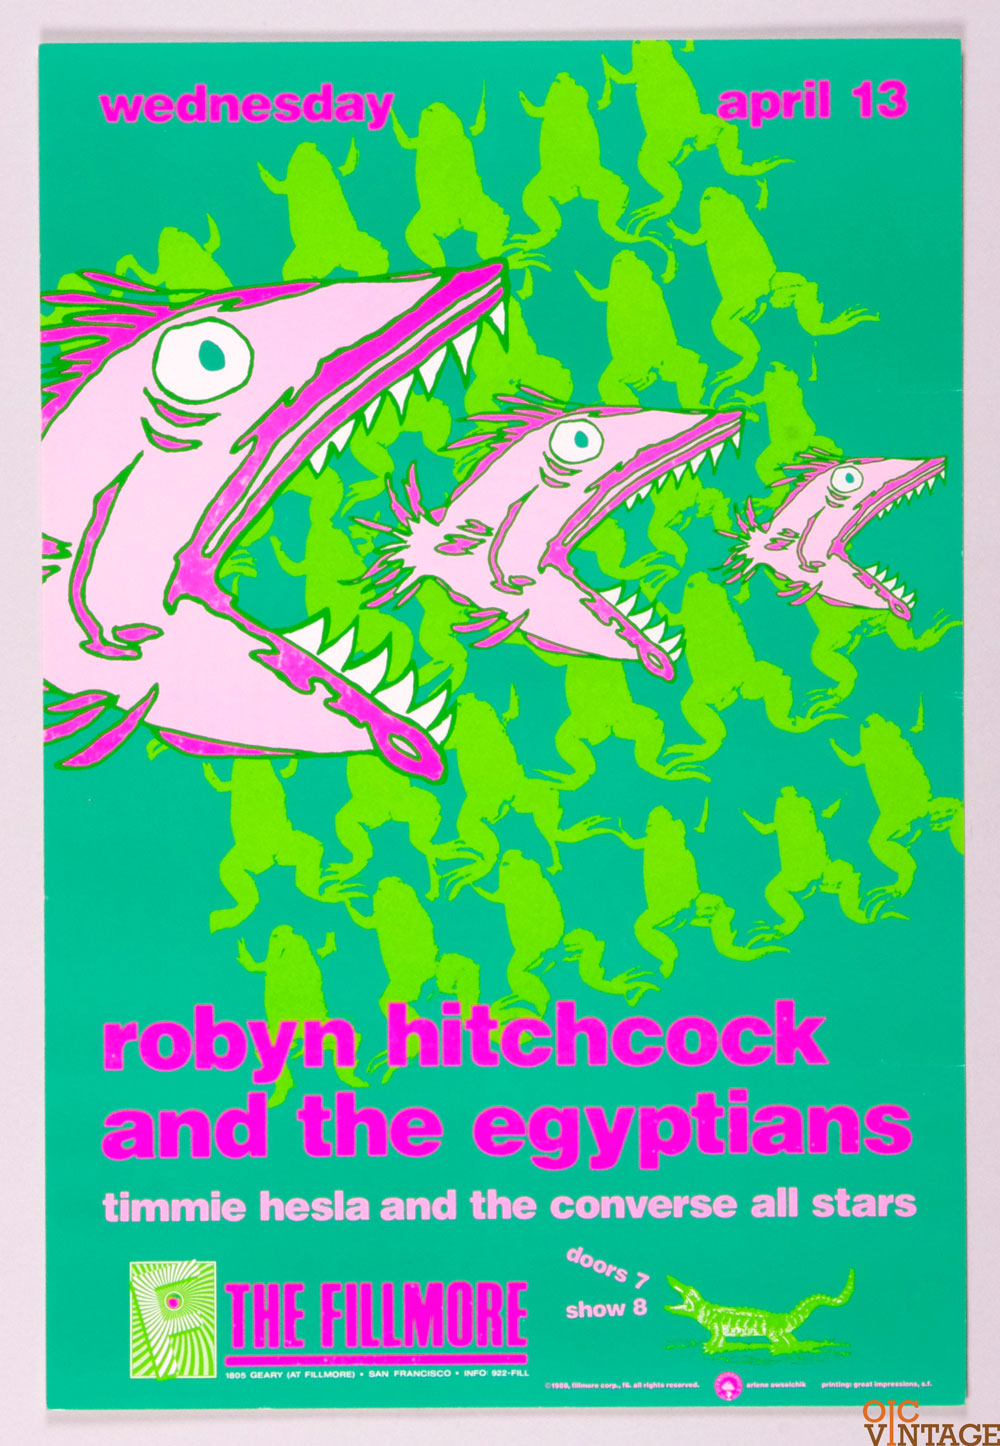 Robyn Hitchcock and the Egyptians Poster 1988 Apr 13 New Fillmore San Francisco